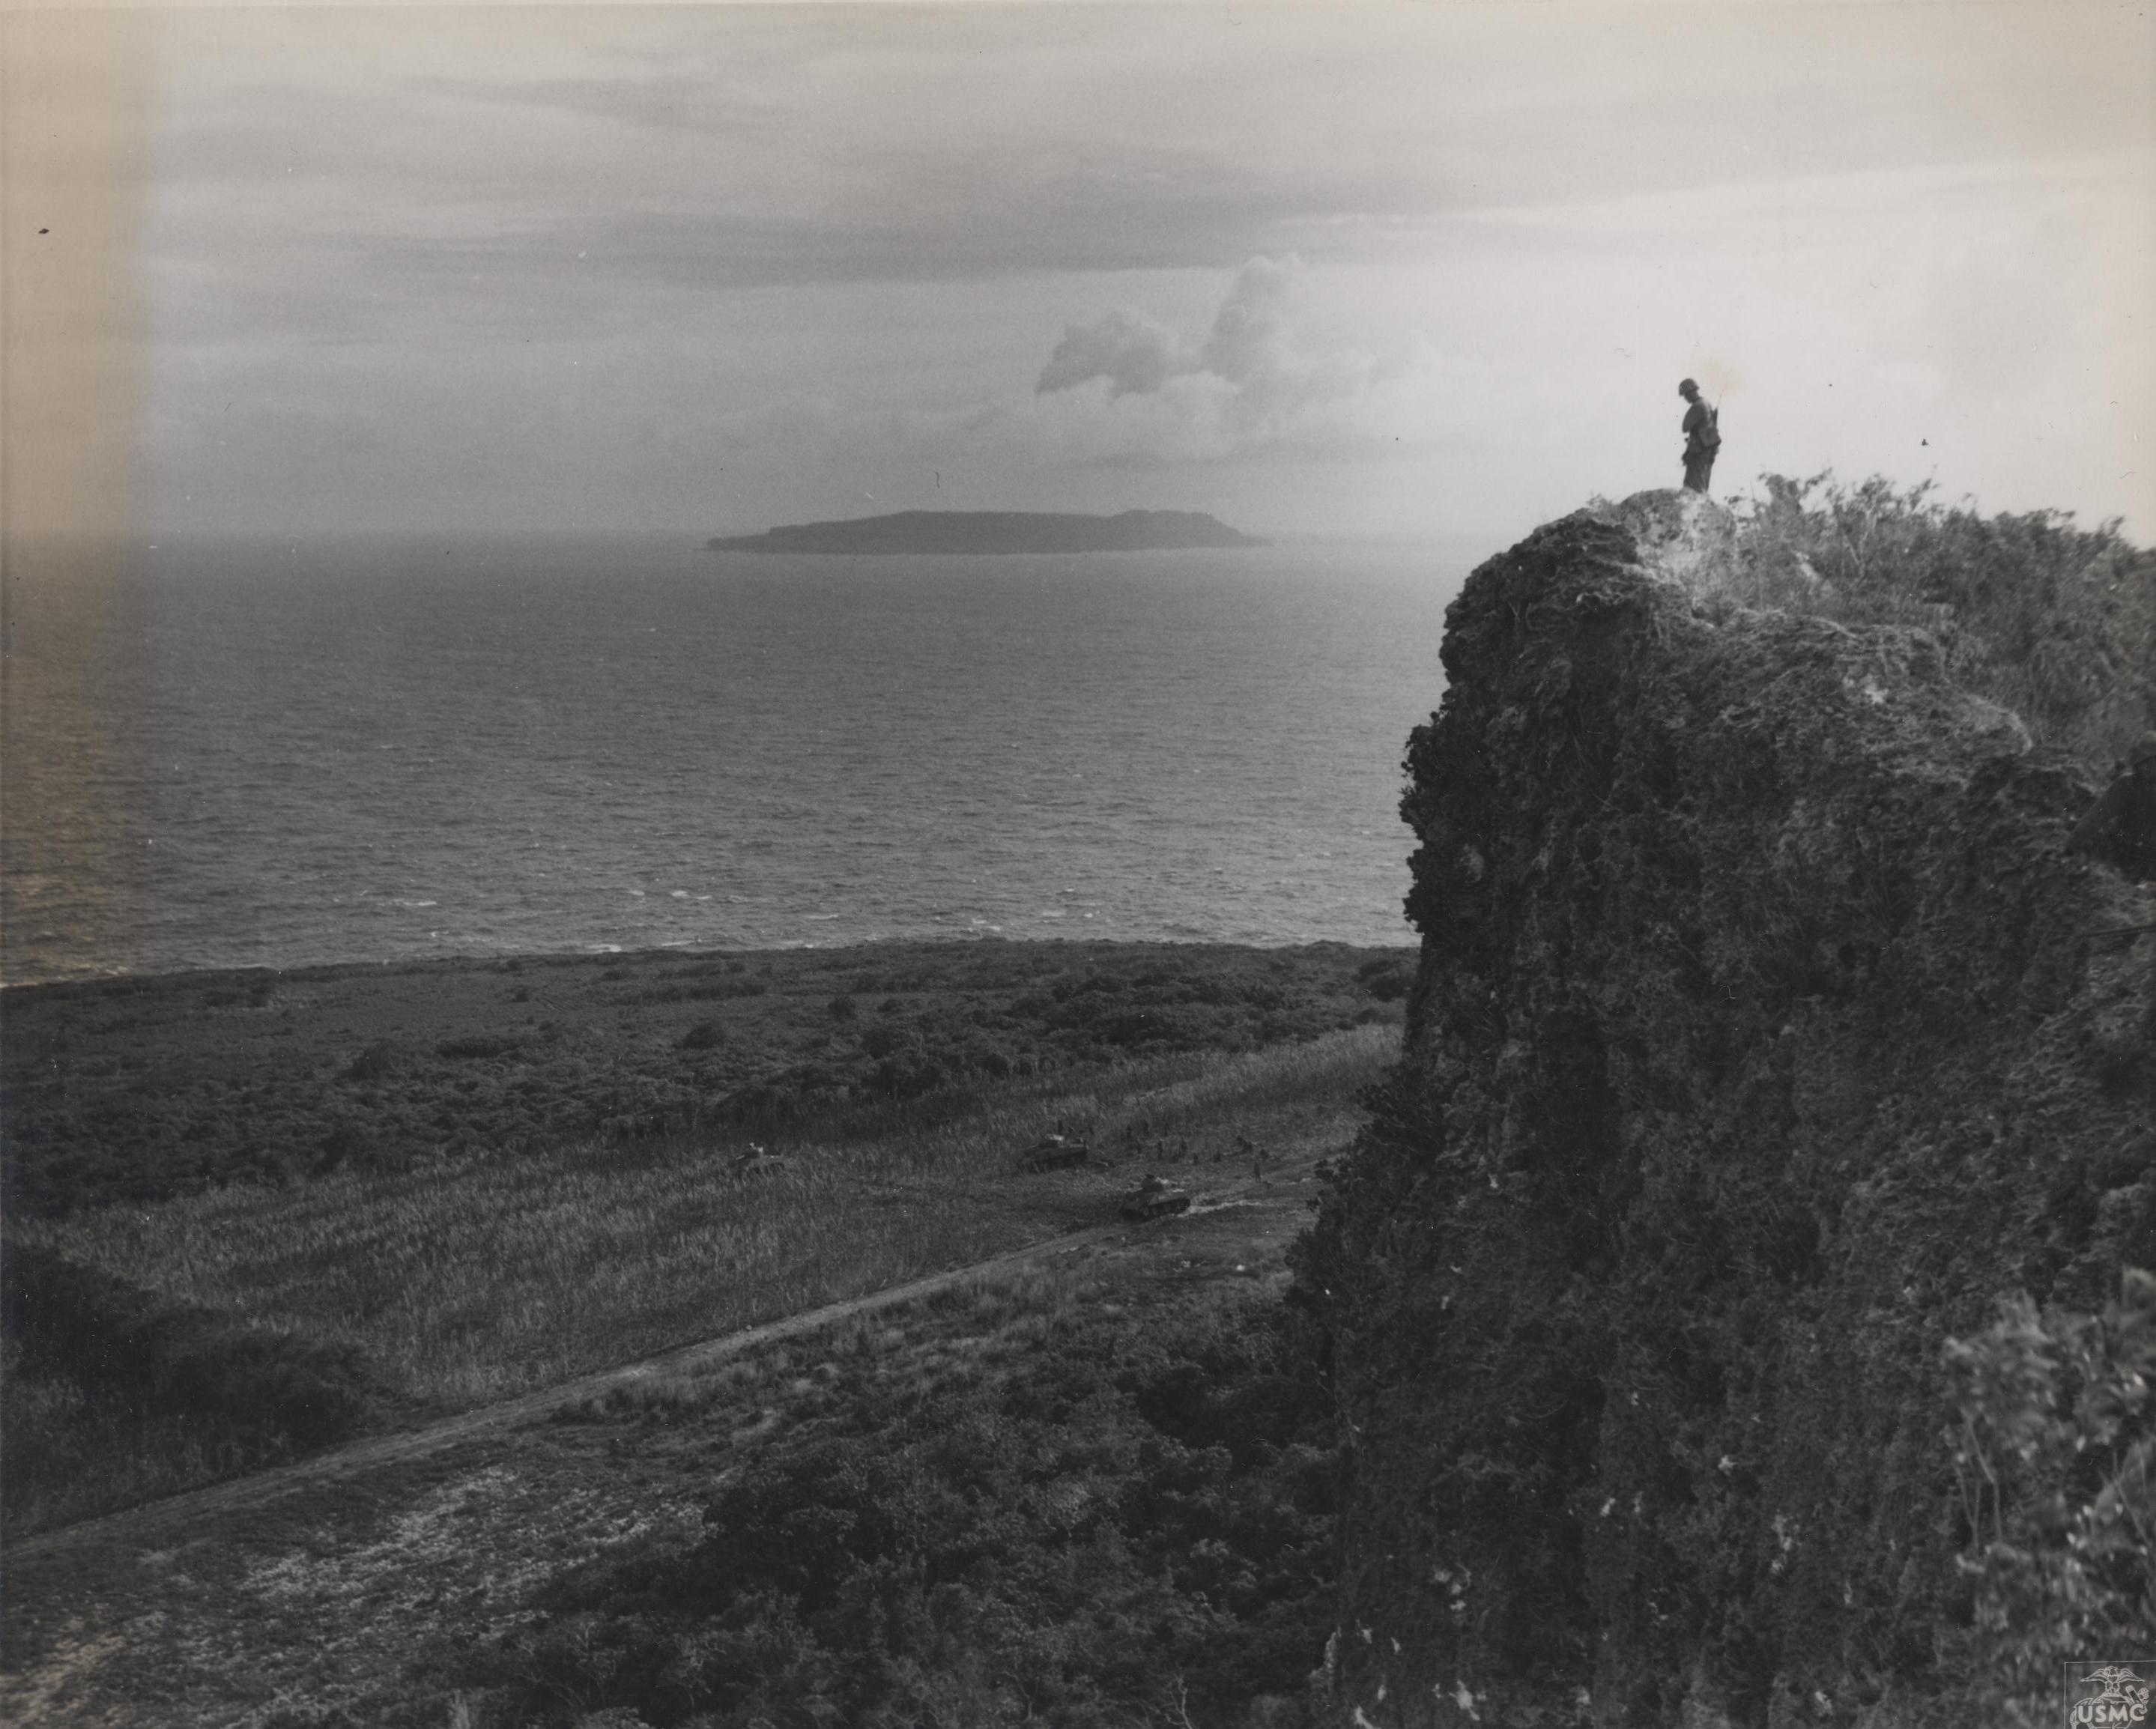 A US Marine standing at the edge of a cliff on Tinian, Mariana Islands, 1944